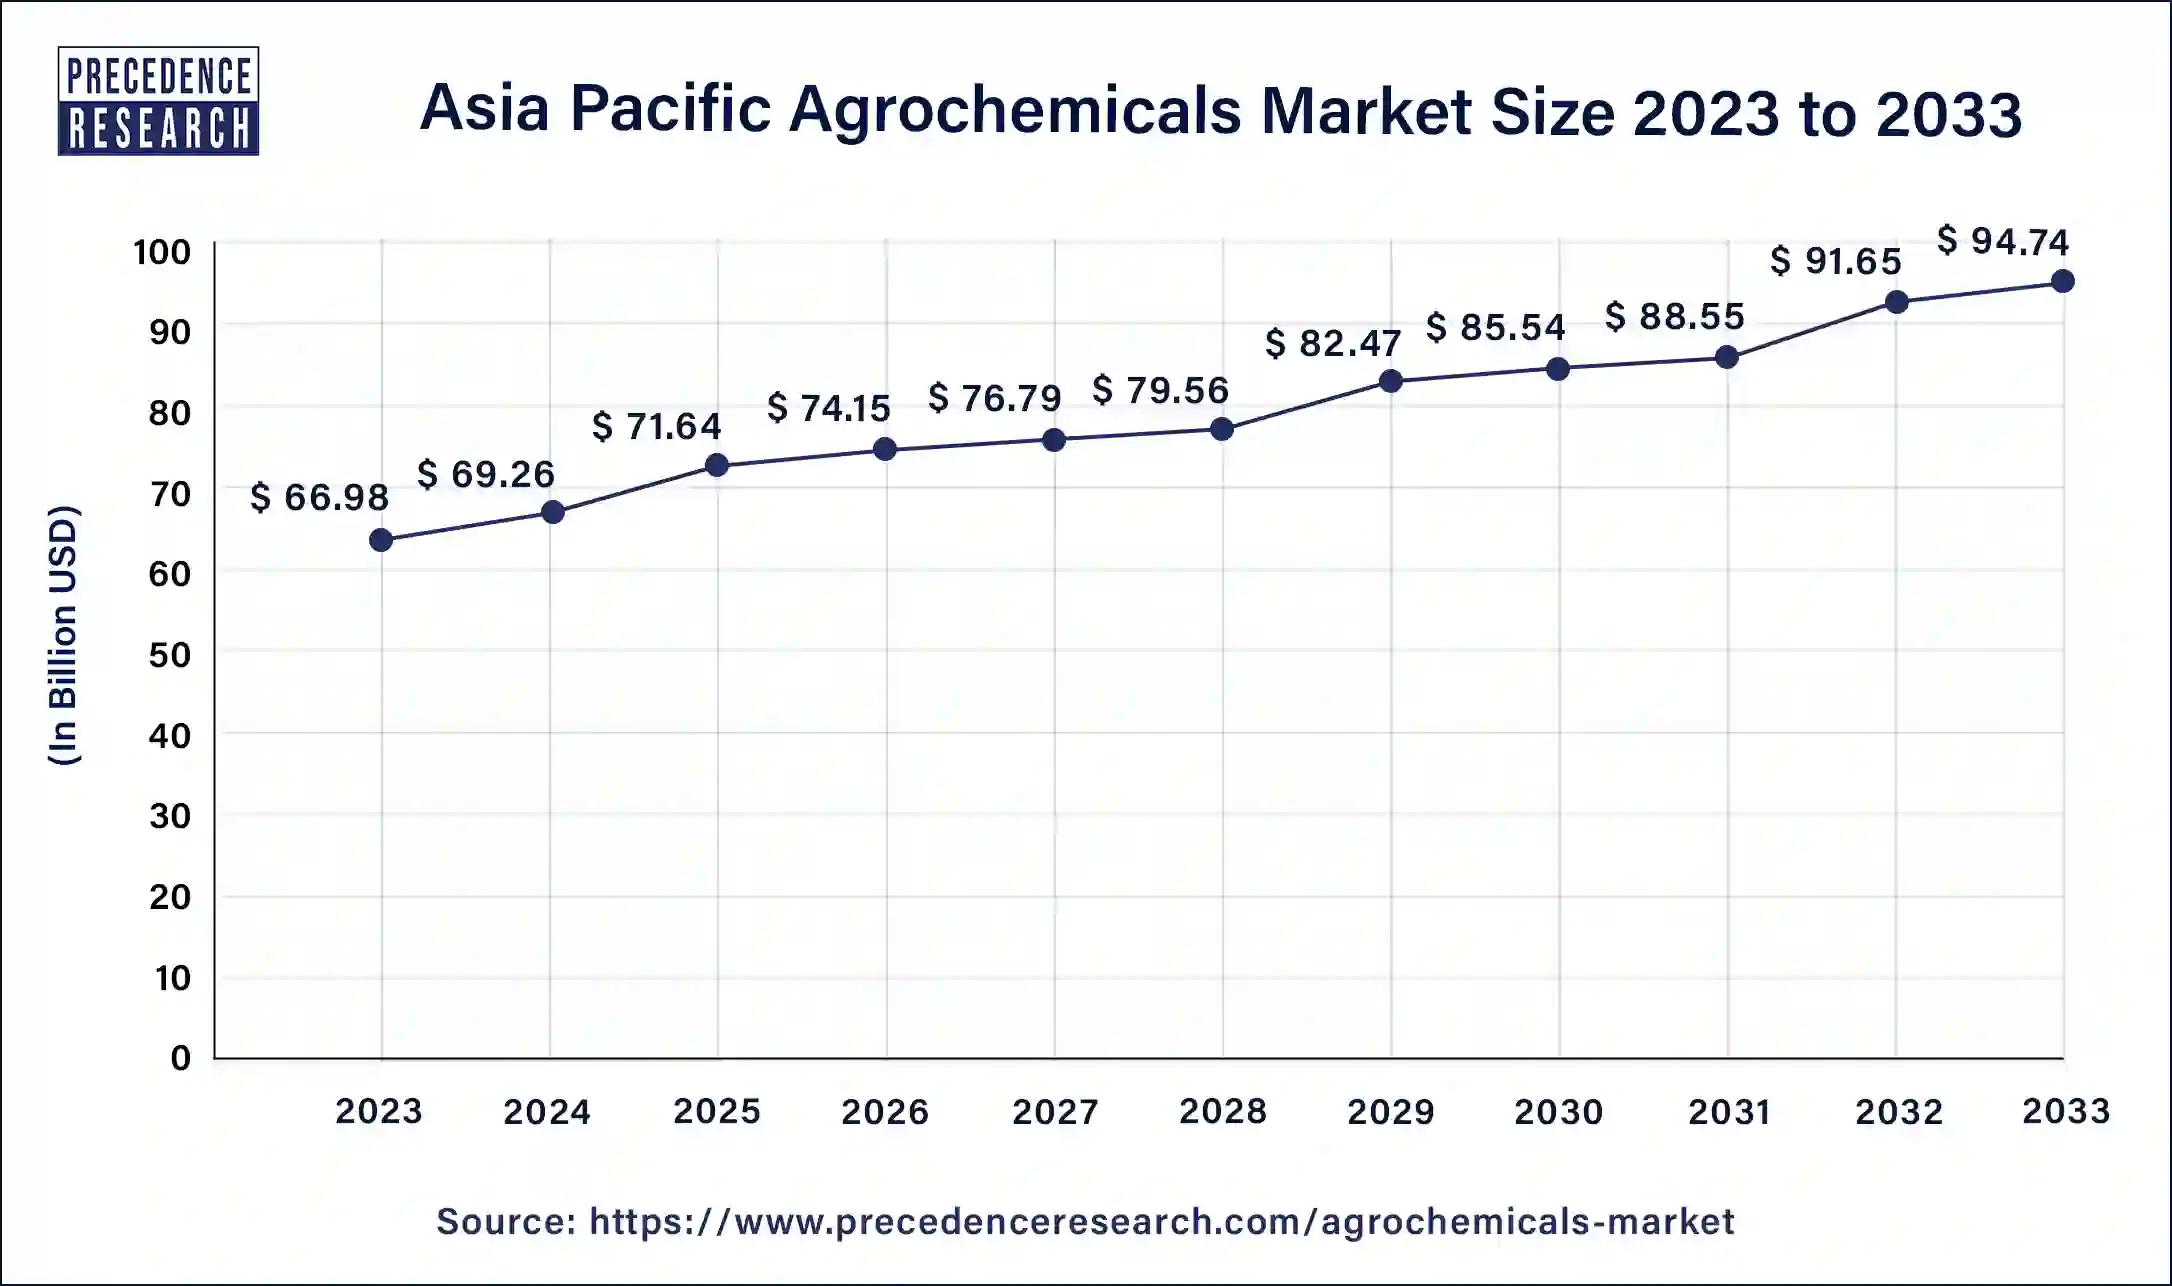 Asia Pacific Agrochemicals Market Size 2024 to 2033